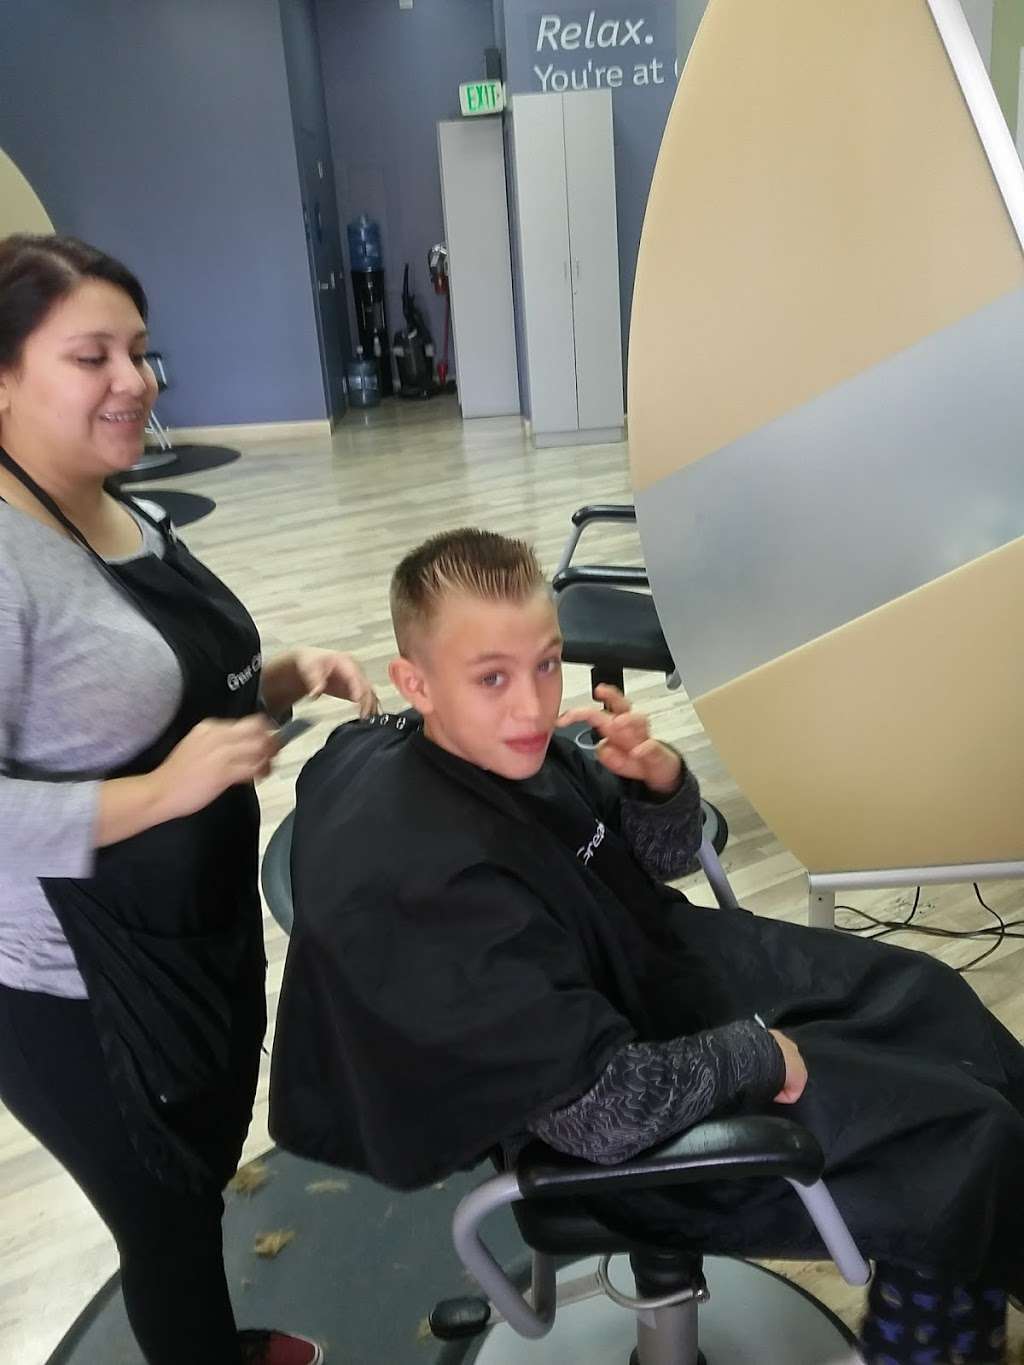 Great Clips | 6040 Main St Ste 144, American Canyon, CA 94503, USA | Phone: (707) 562-2555